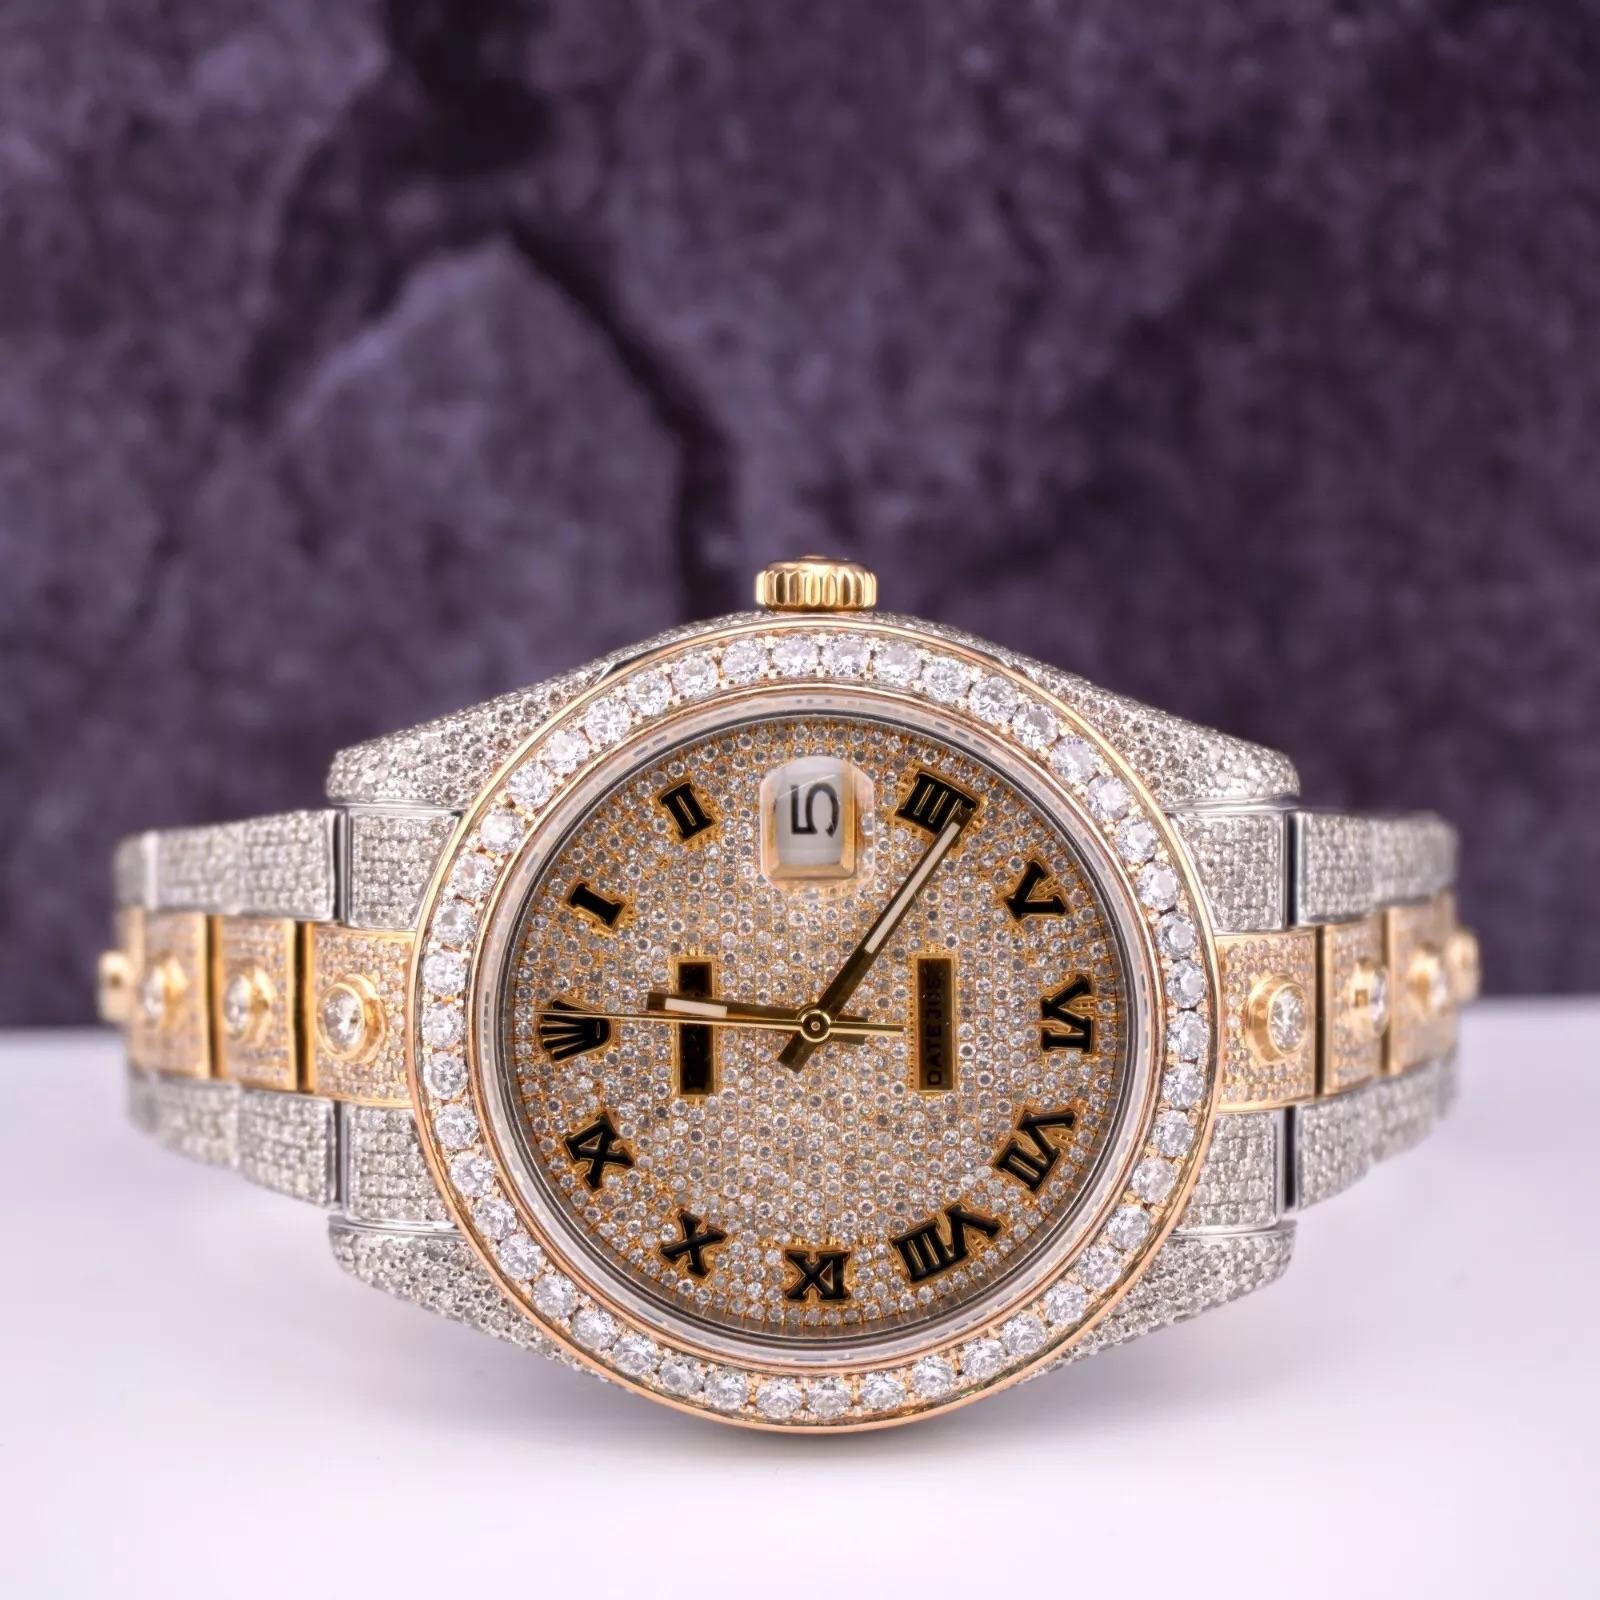 Rolex Datejust 41mm Watch customized with 22.00 carats of Genuine Diamonds! The entire watch is Genuine only the custom Diamond Bezel and Dial have been added. The entire bezel, dial, case and band have been beautifully handset in white 